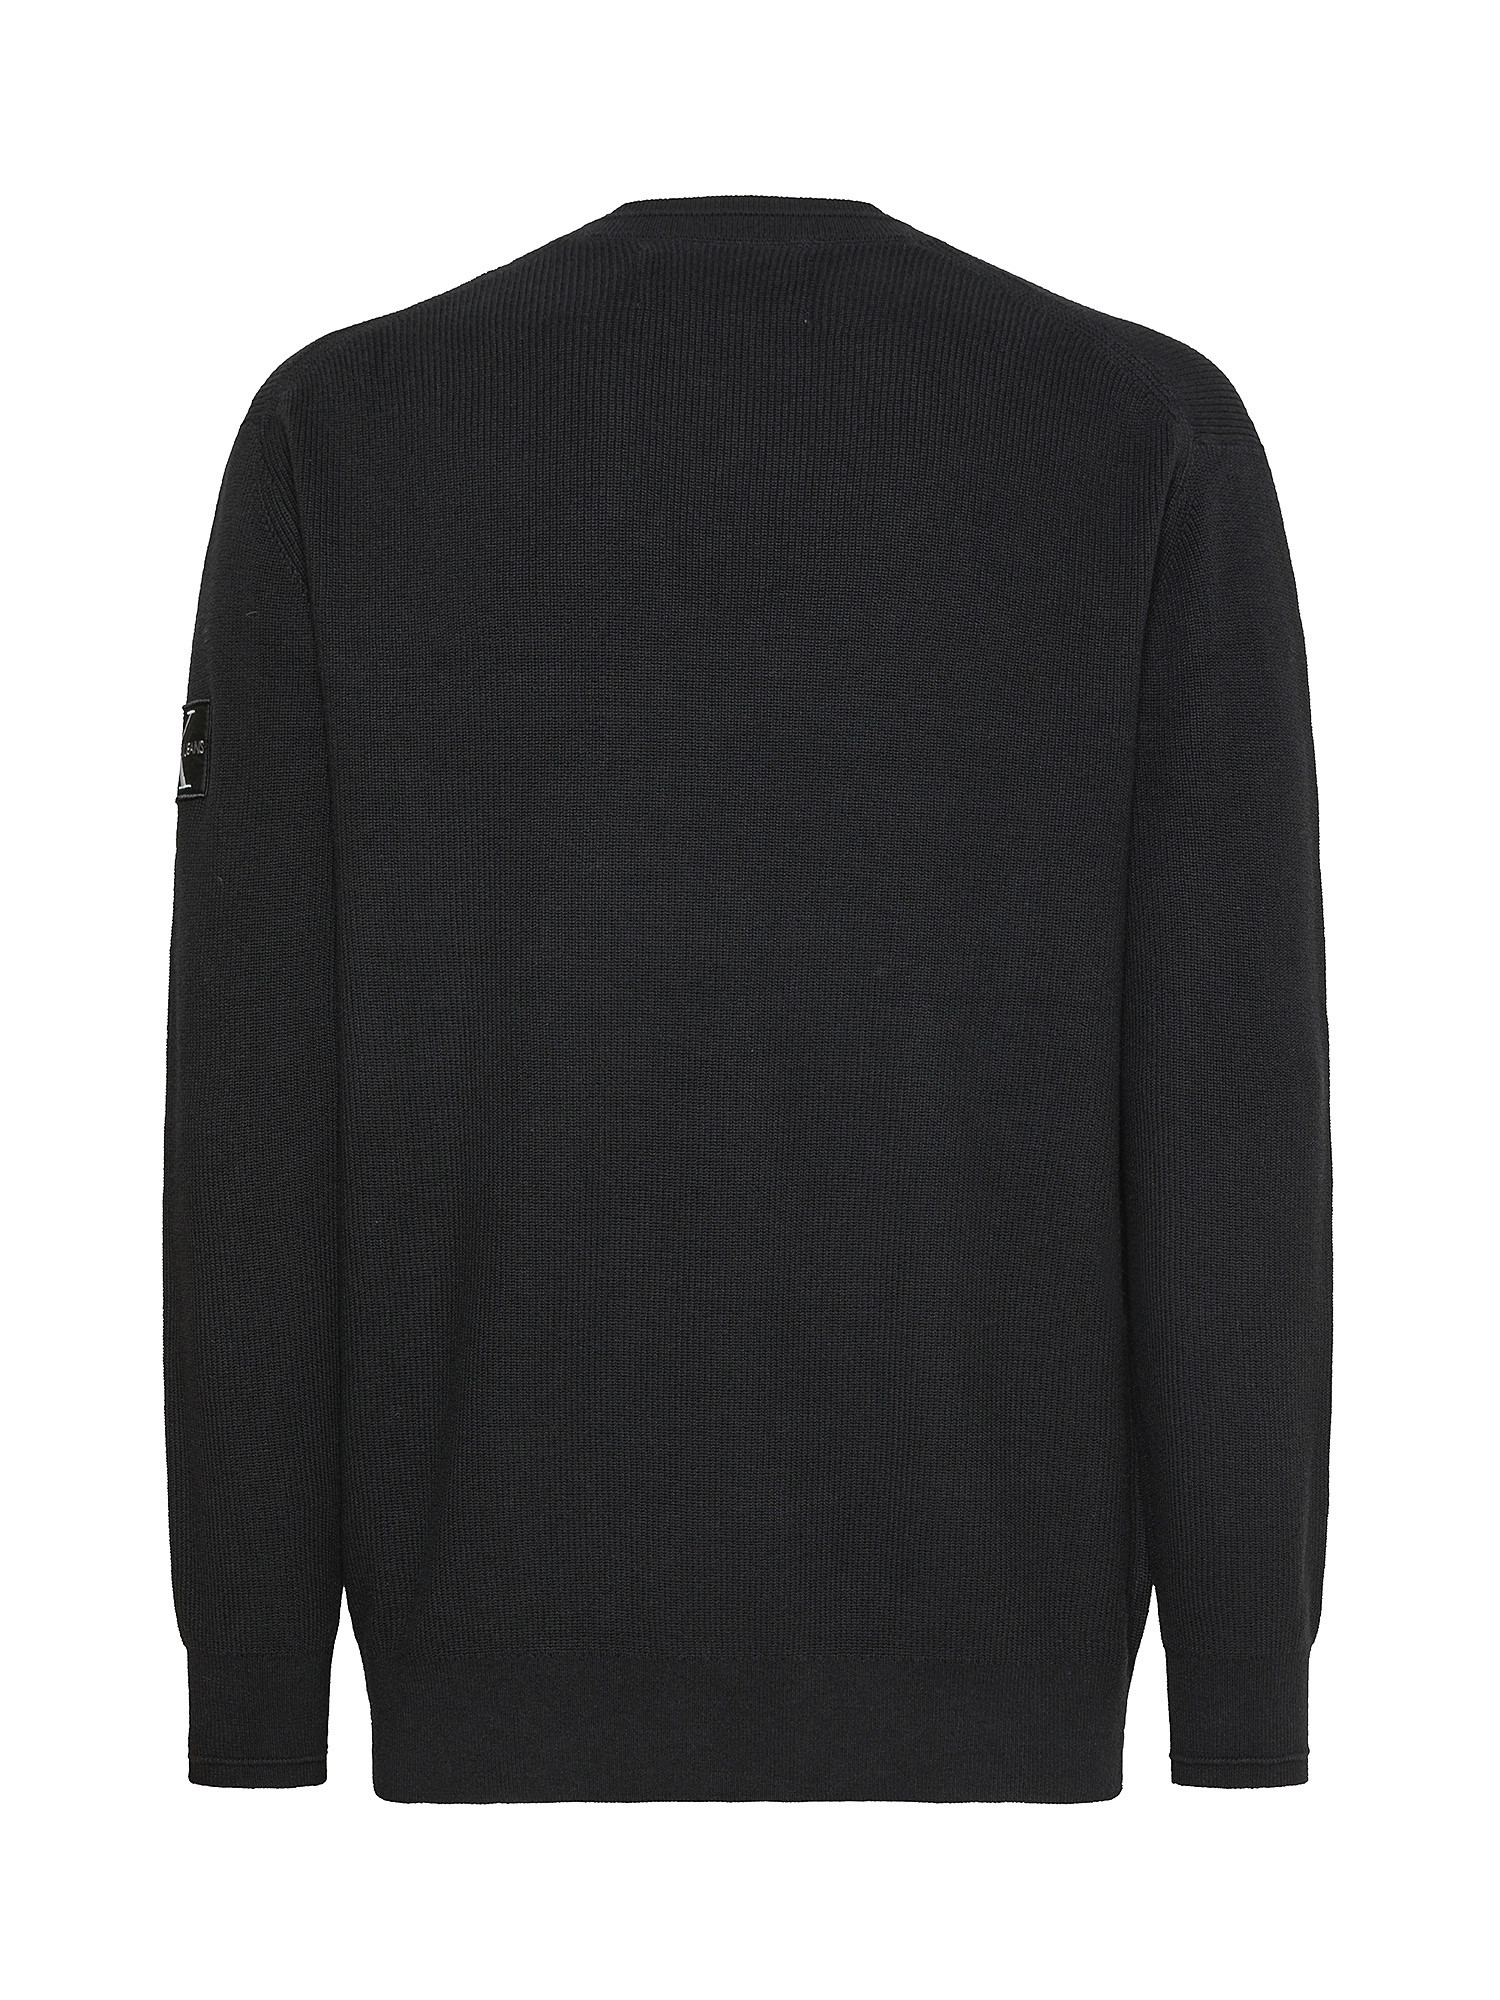 Calvin Klein Jeans -  Pullover a costine in cotone, Nero, large image number 1